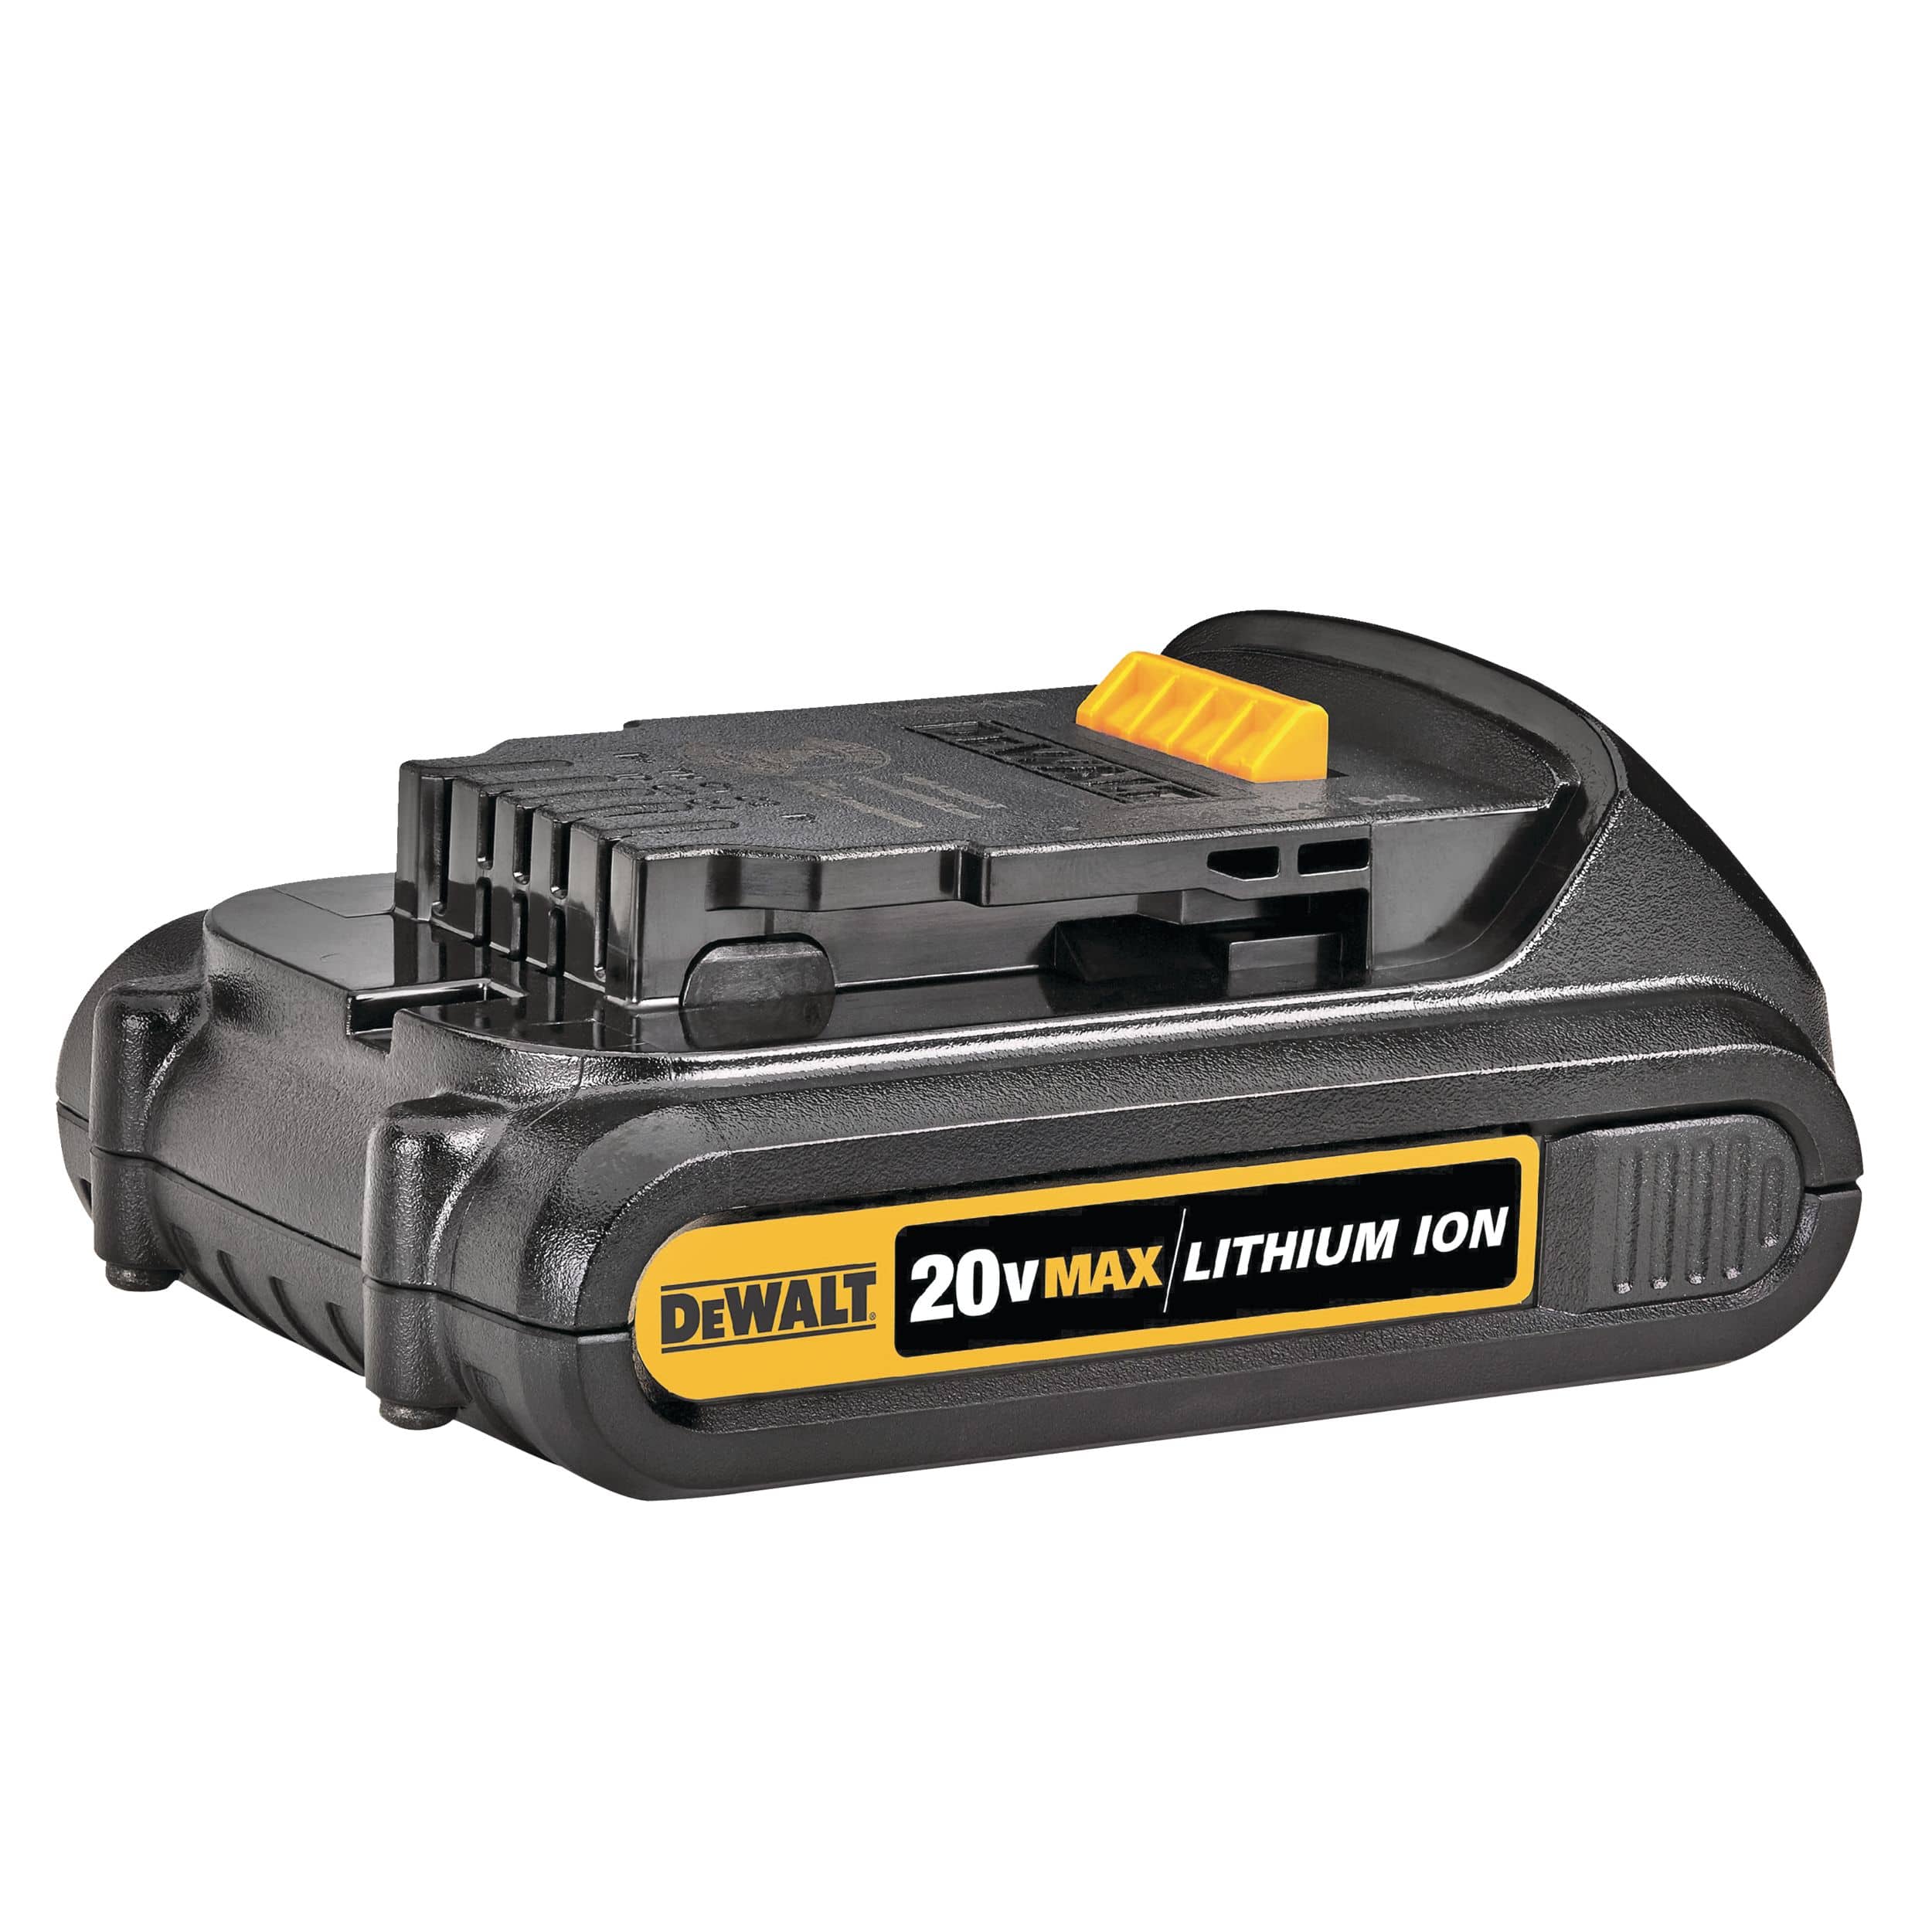 DEWALT DCD771C2 20V MAX Lithium-Ion Compact Cordless Drill/Driver with  Battery  Charger, 1/2-in Canadian Tire